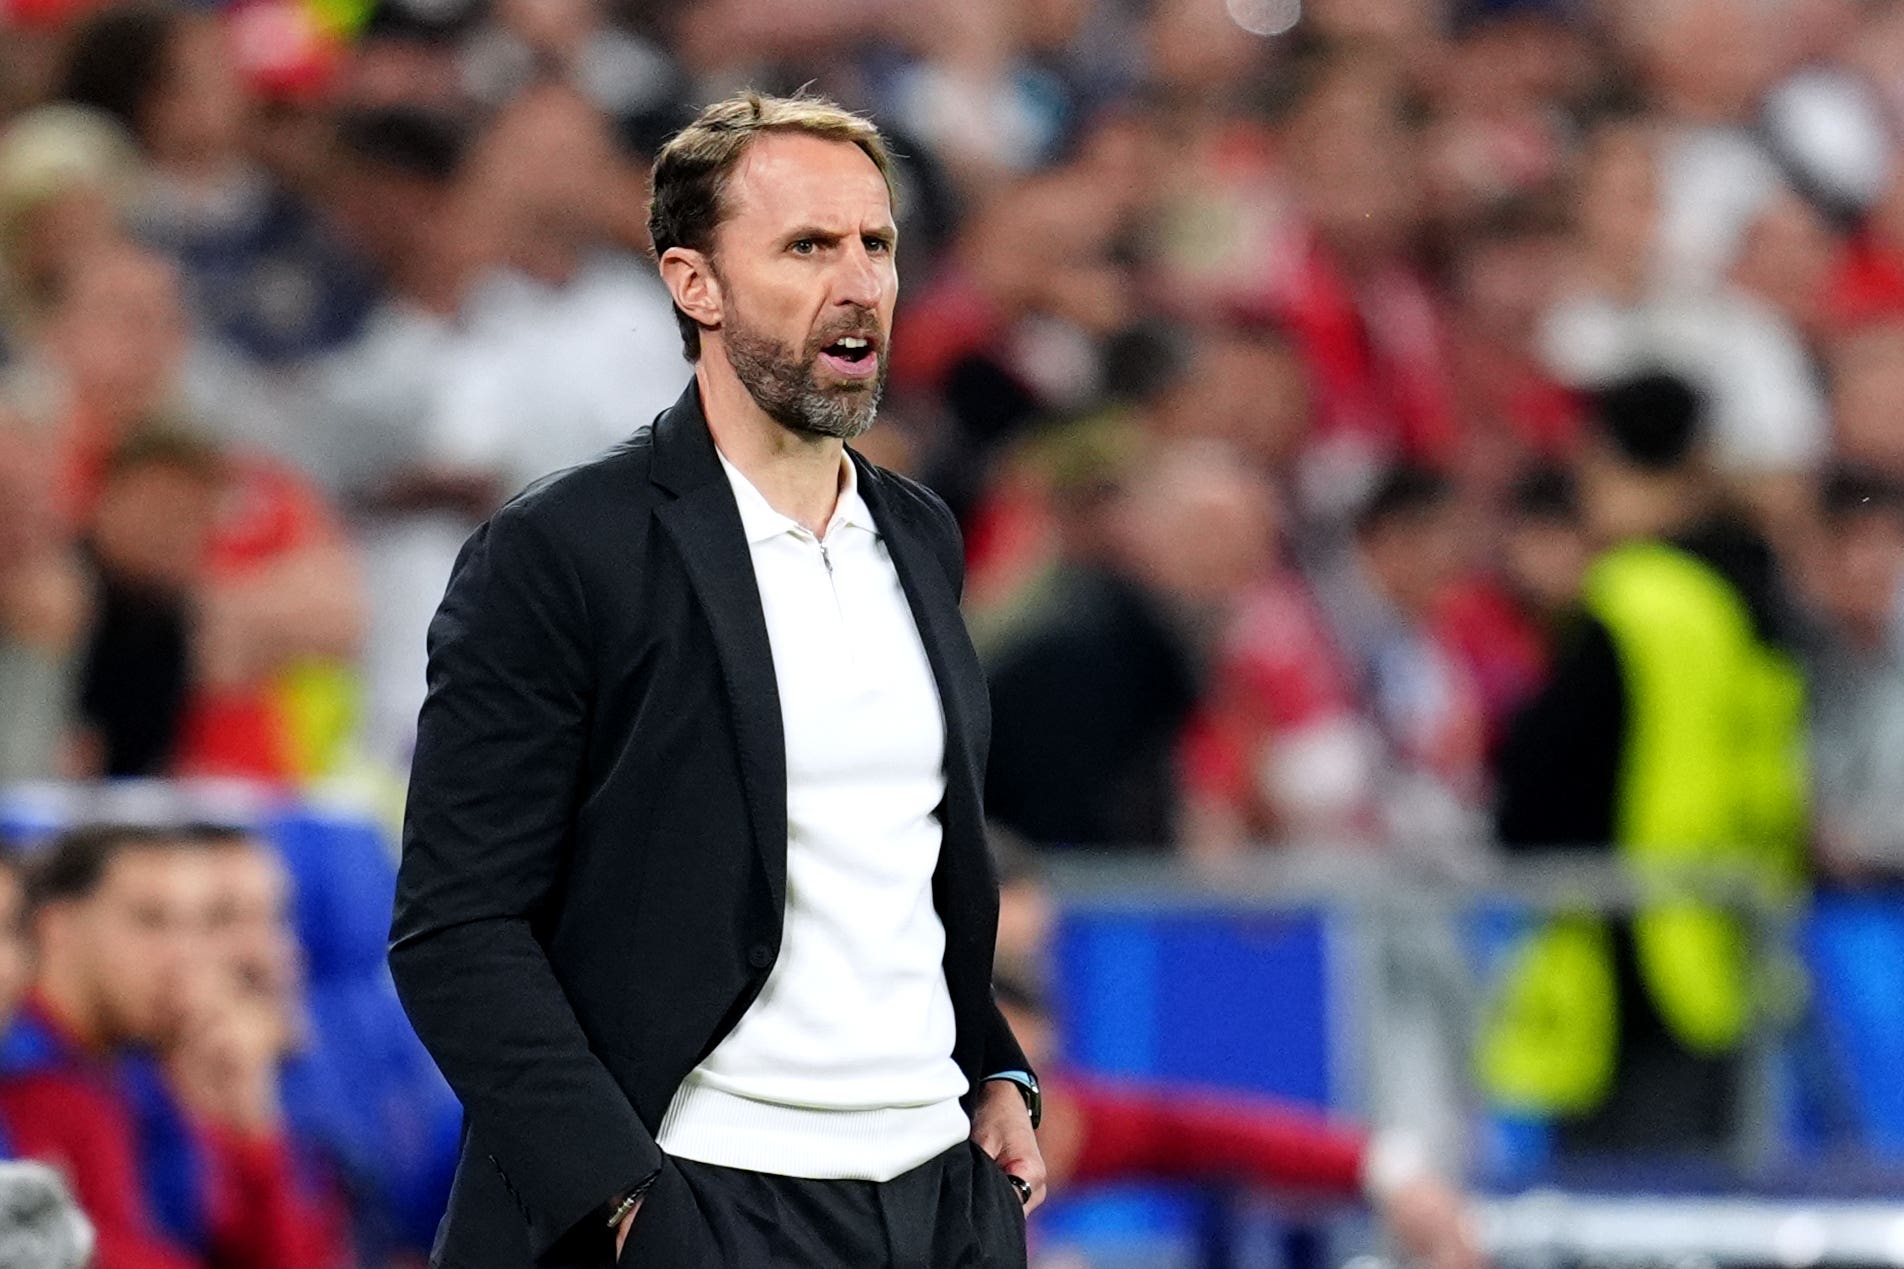 England manager Gareth Southgate must consider whether to make any alterations